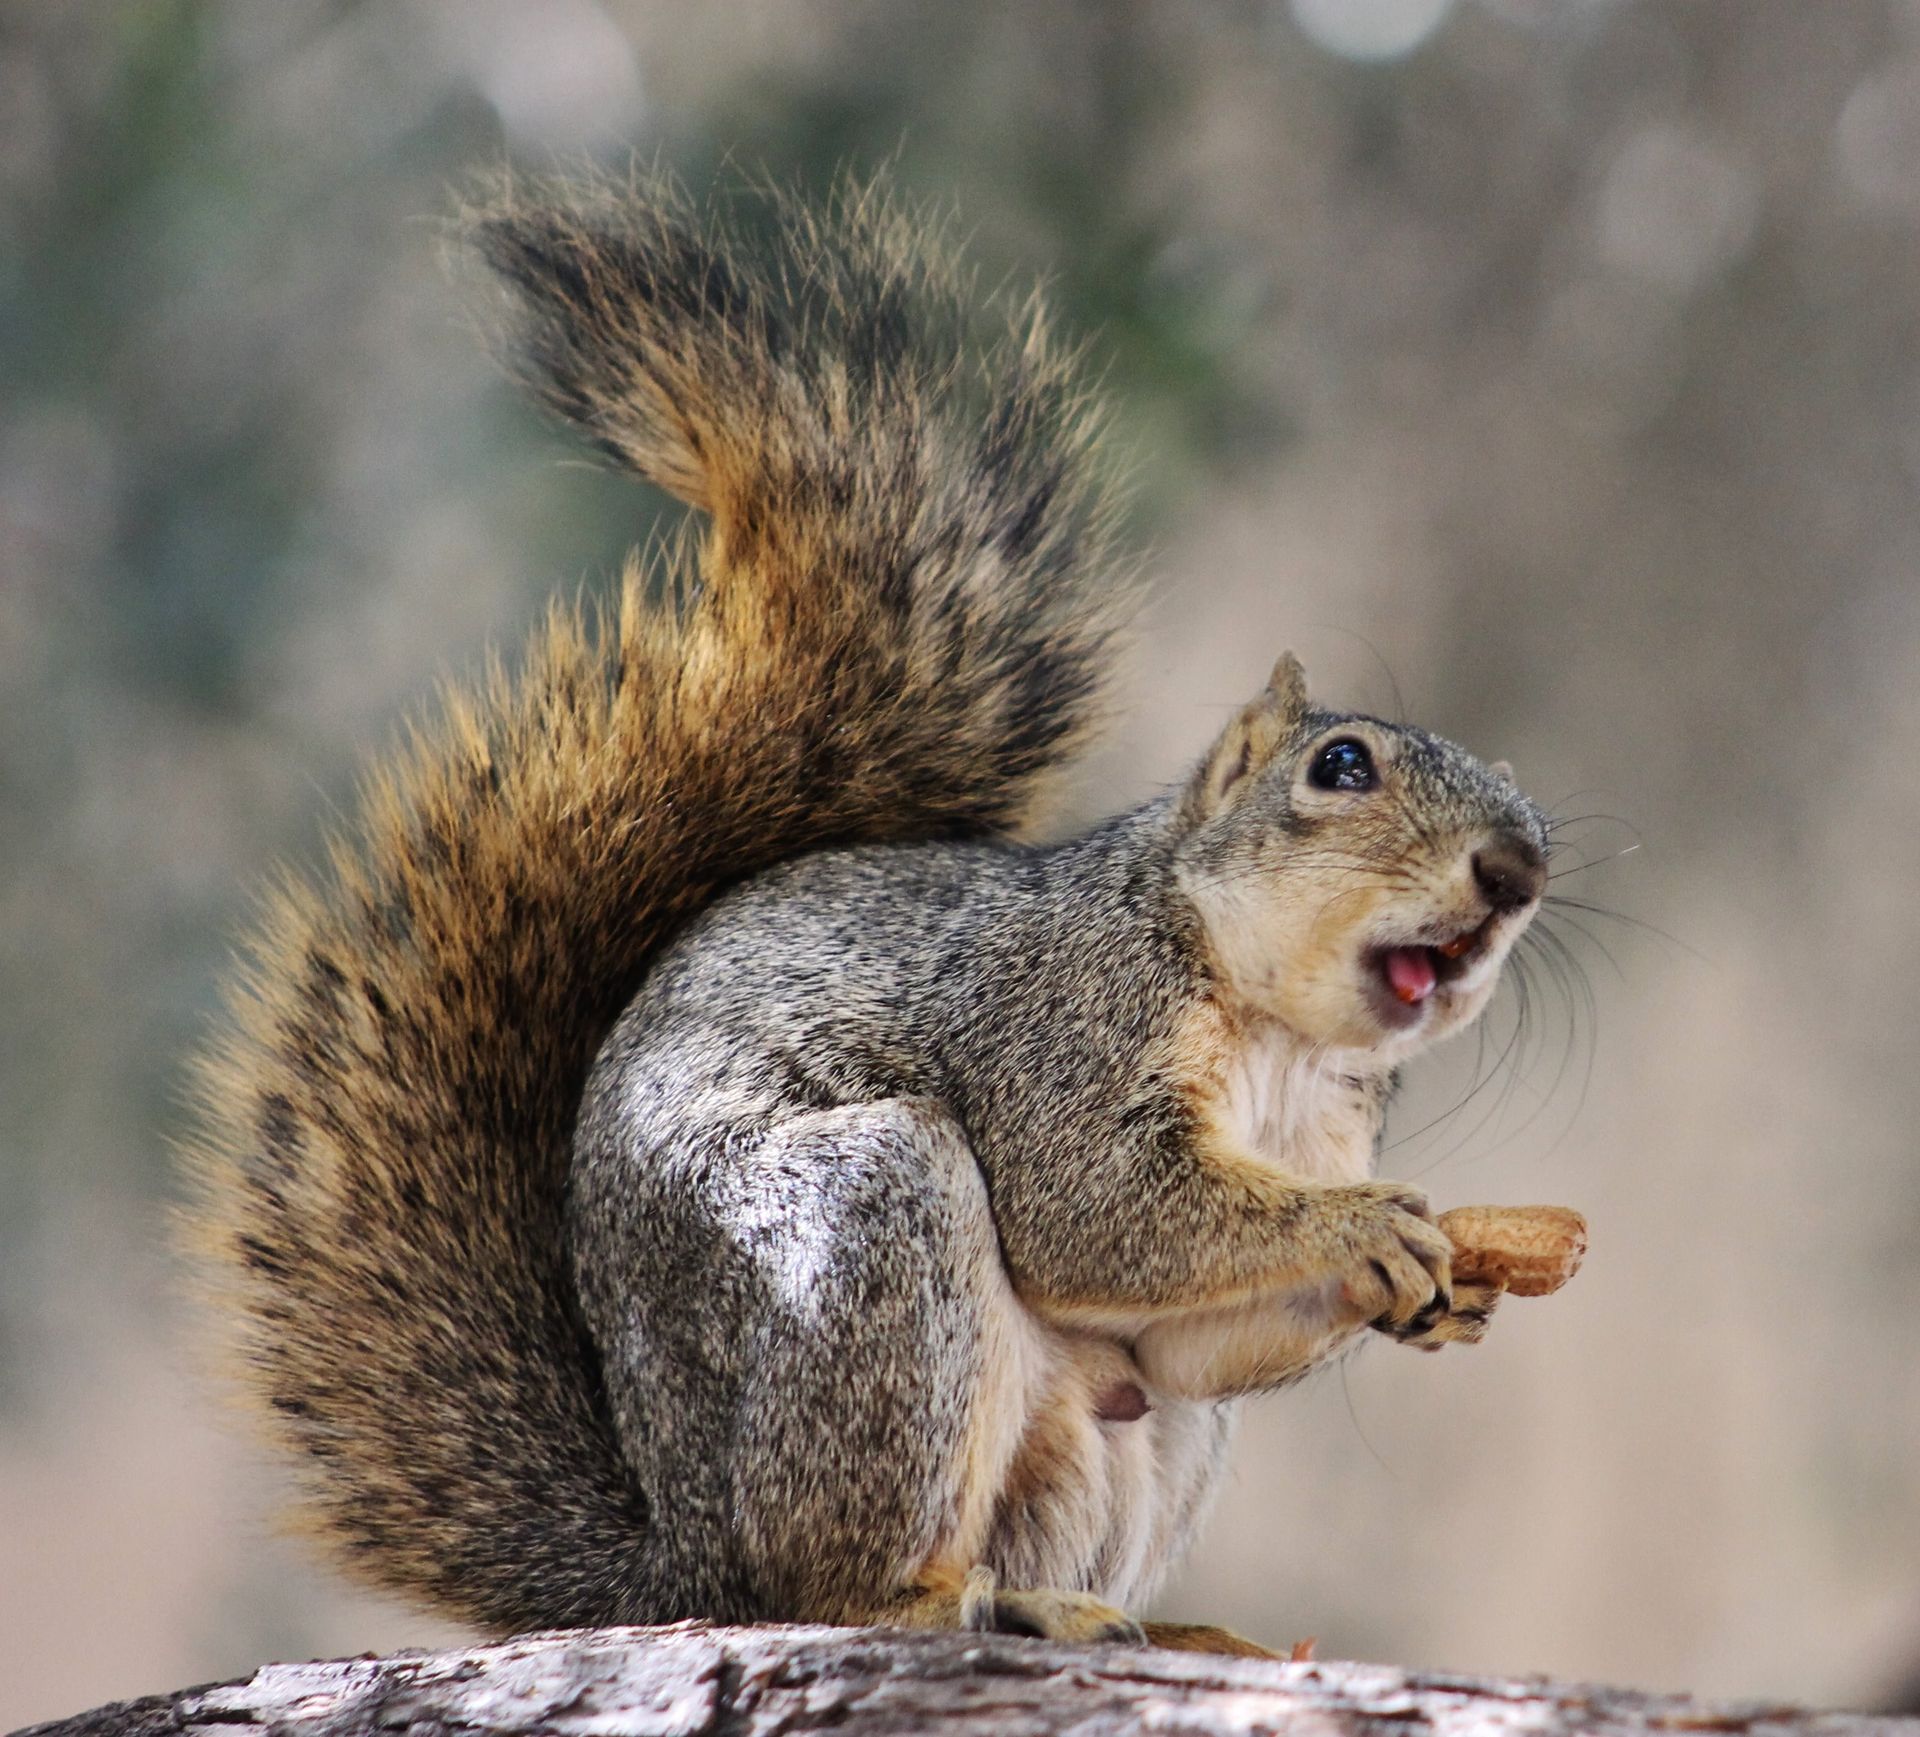 A portrait of a squirrel eating a nut.